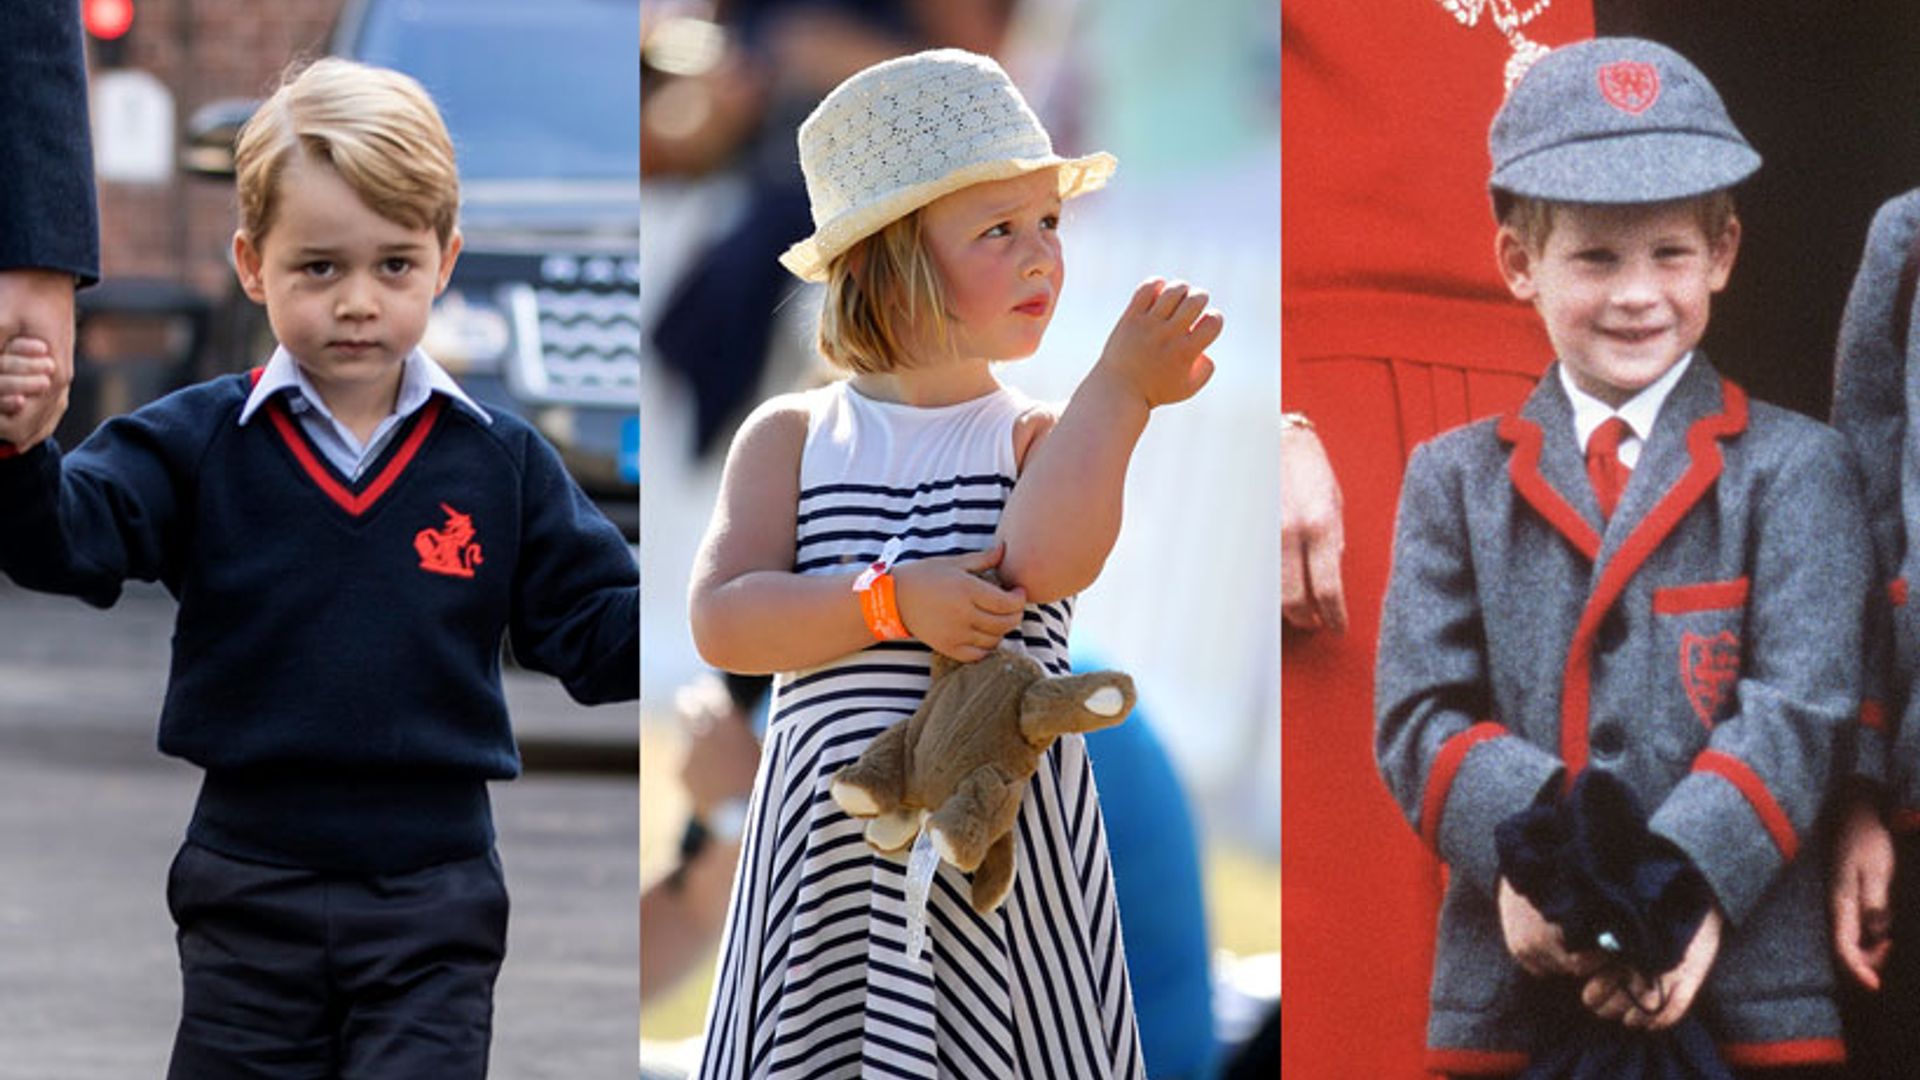 Video: The royals on their first day of school, Prince George, Prince Harry and more